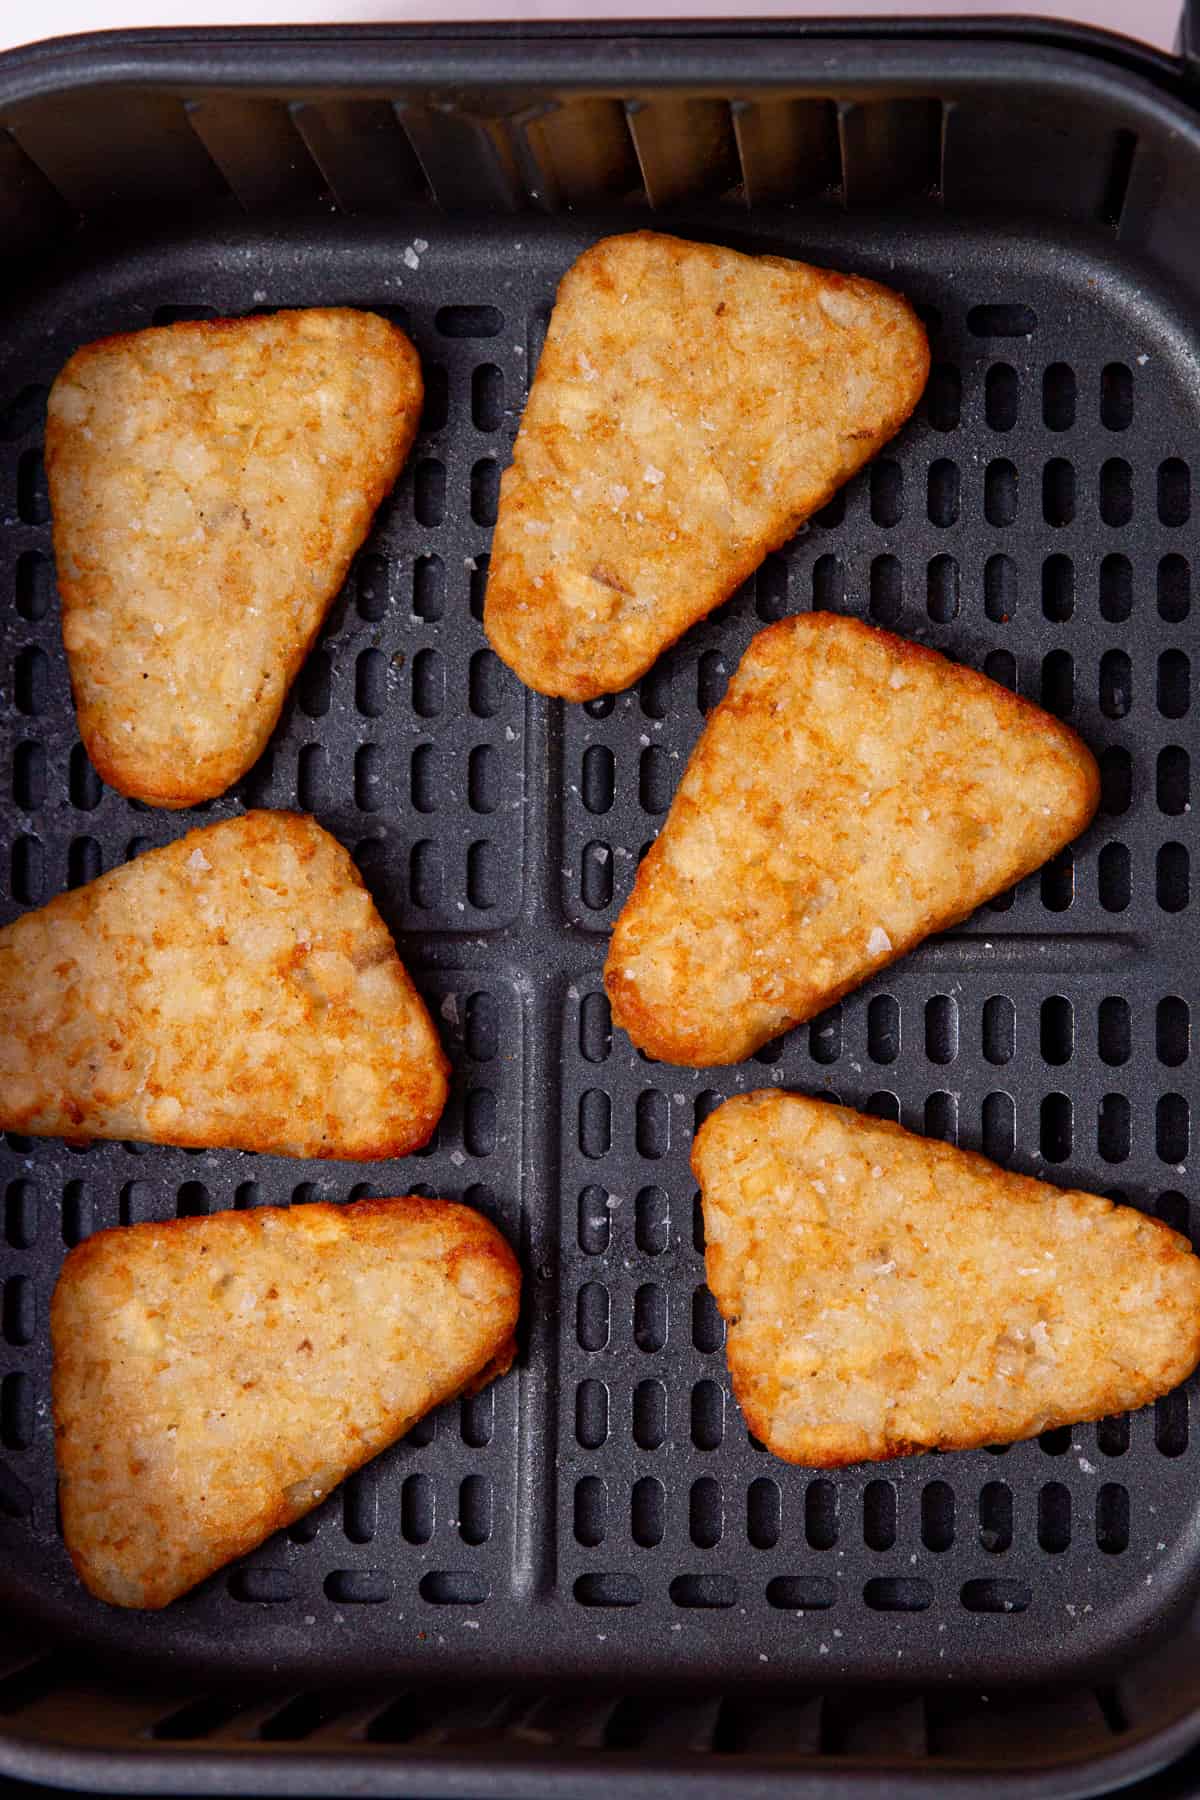 6 cooked hash browns in the airfryer tray with a sprinkle of salt.